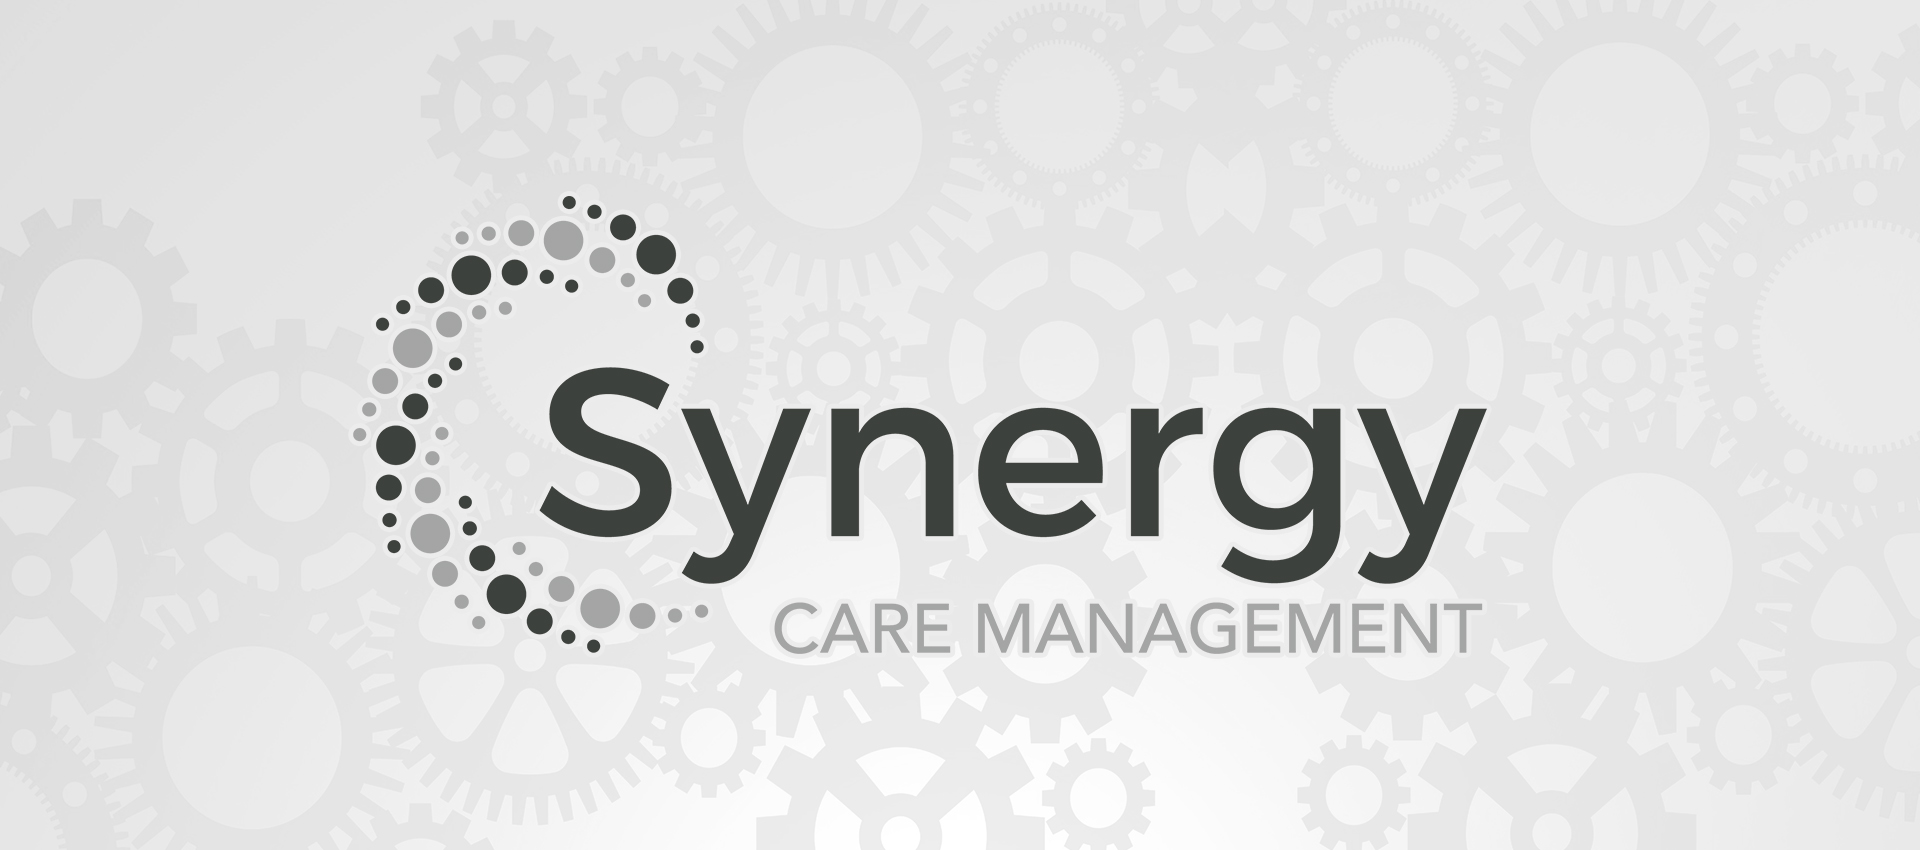 synergy healthcare sold nursing homes